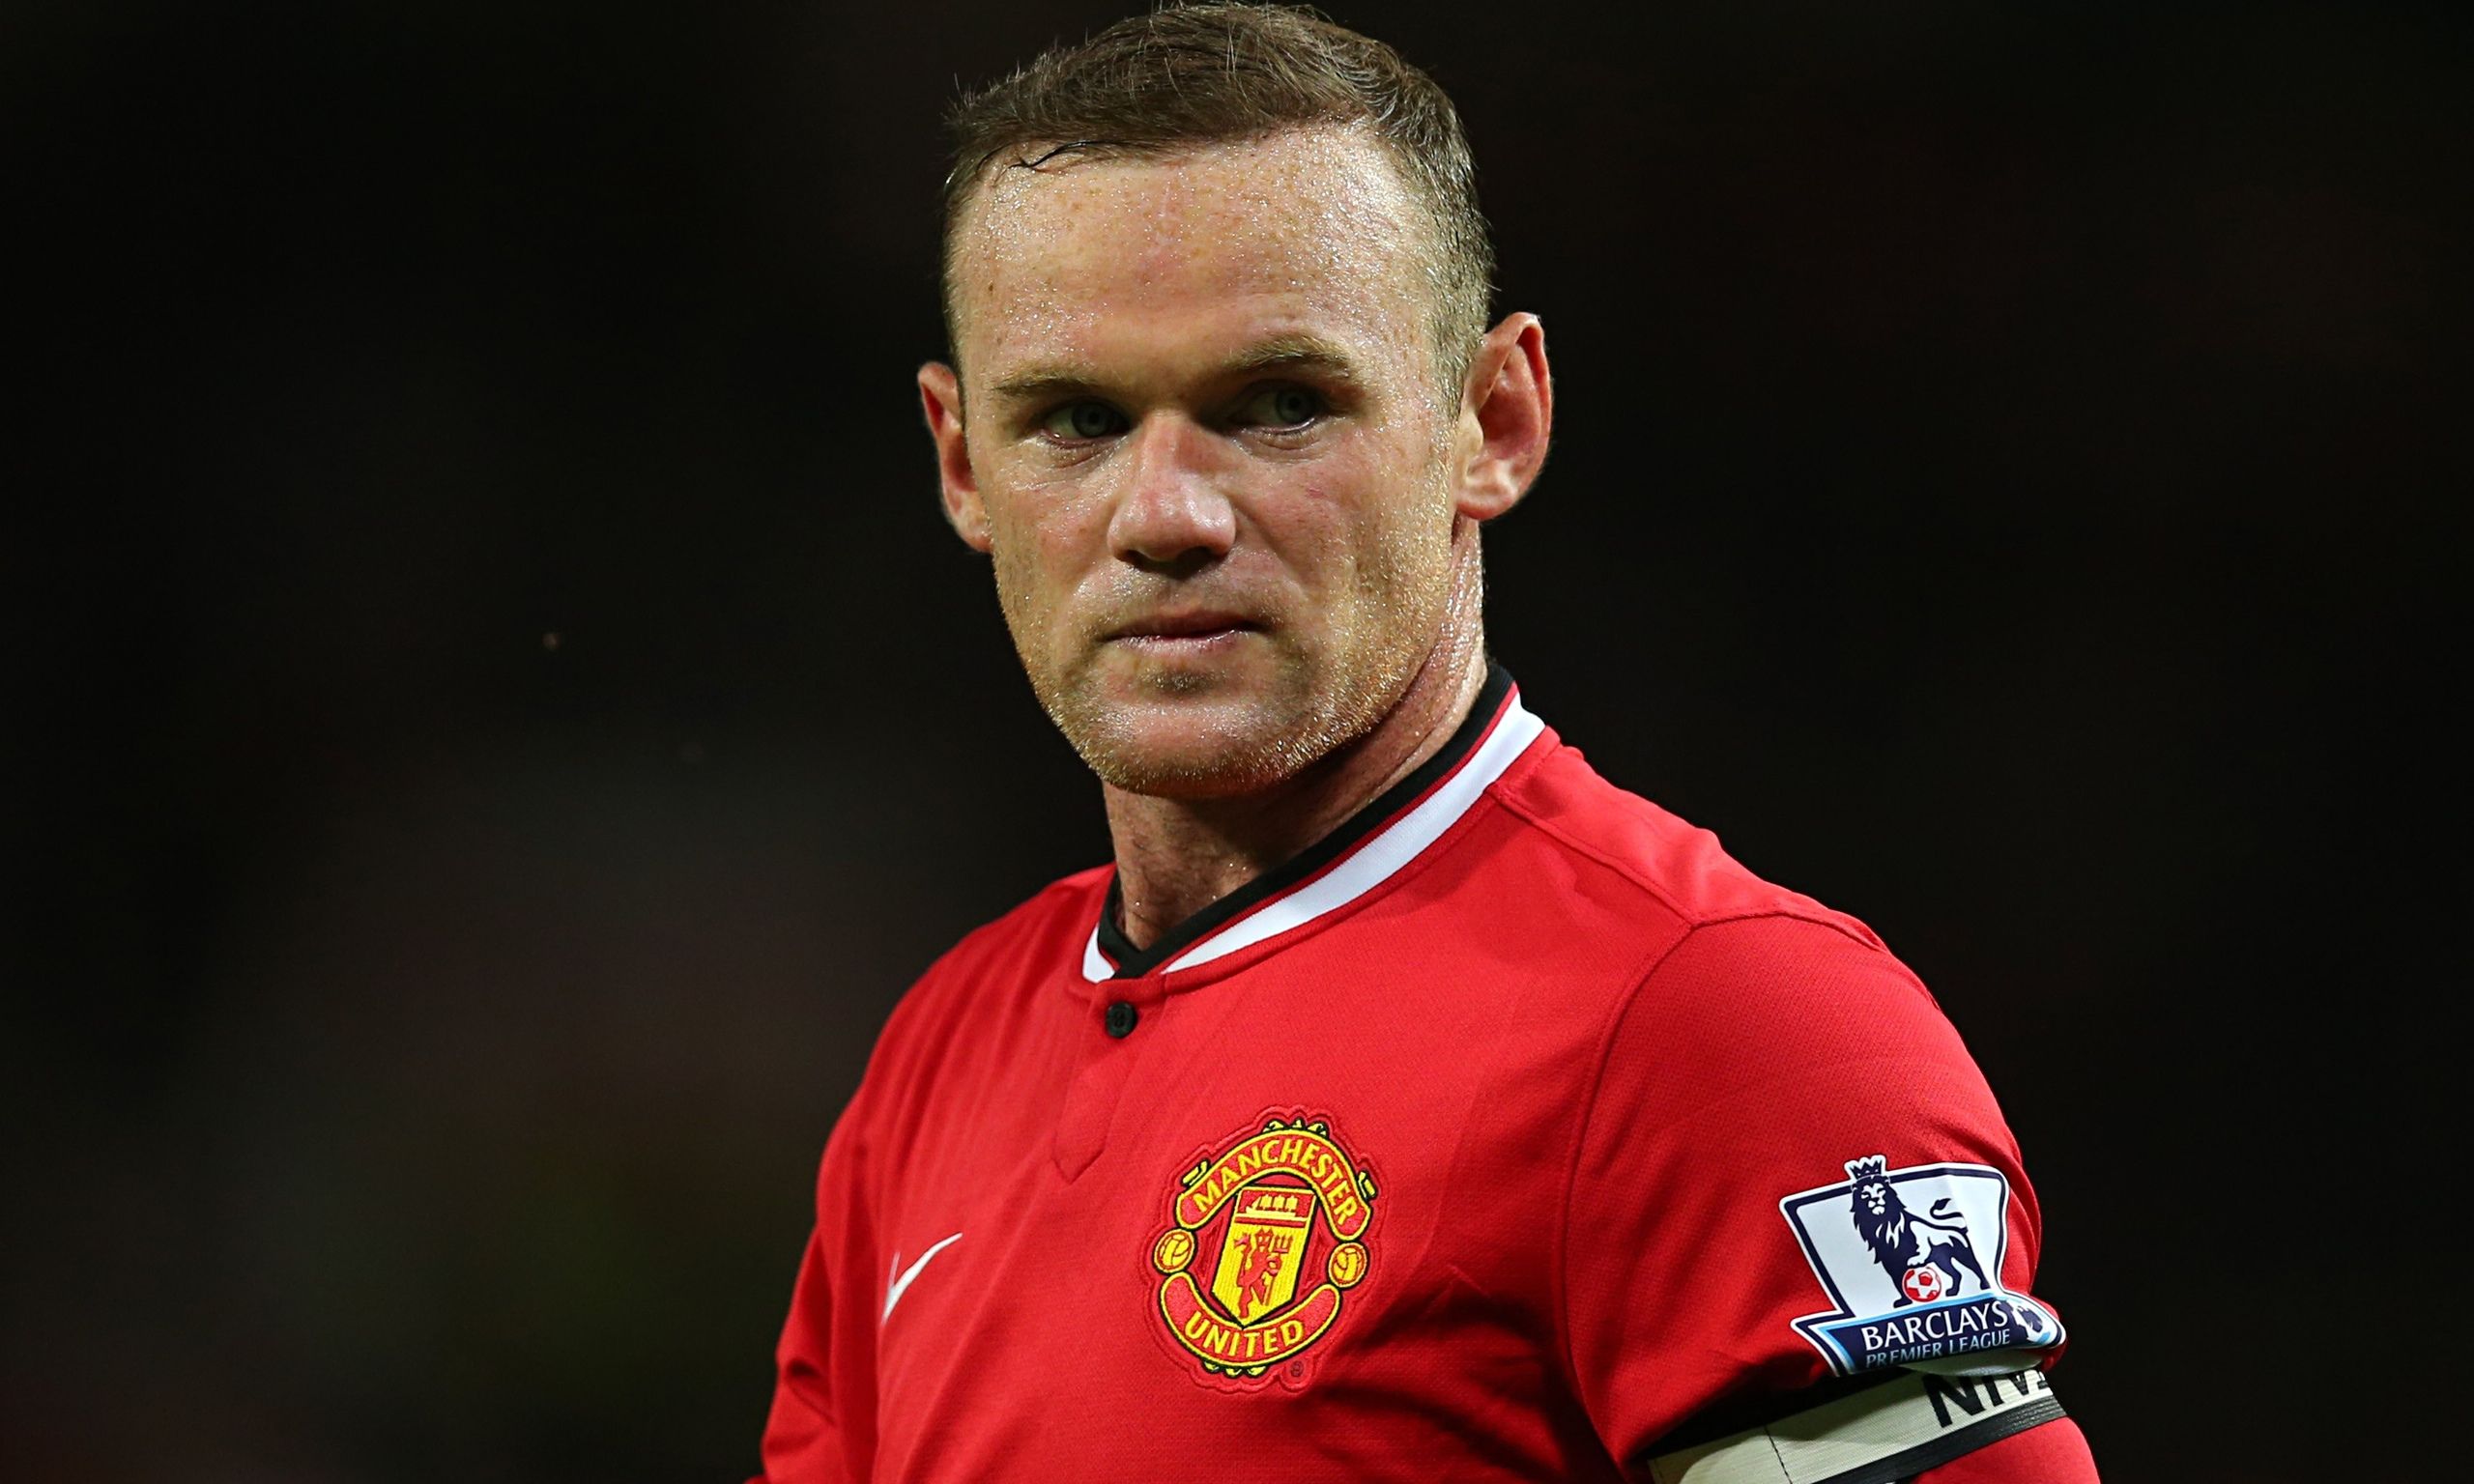 Wayne Rooney Engages in Discussions for Misfits Boxing Match